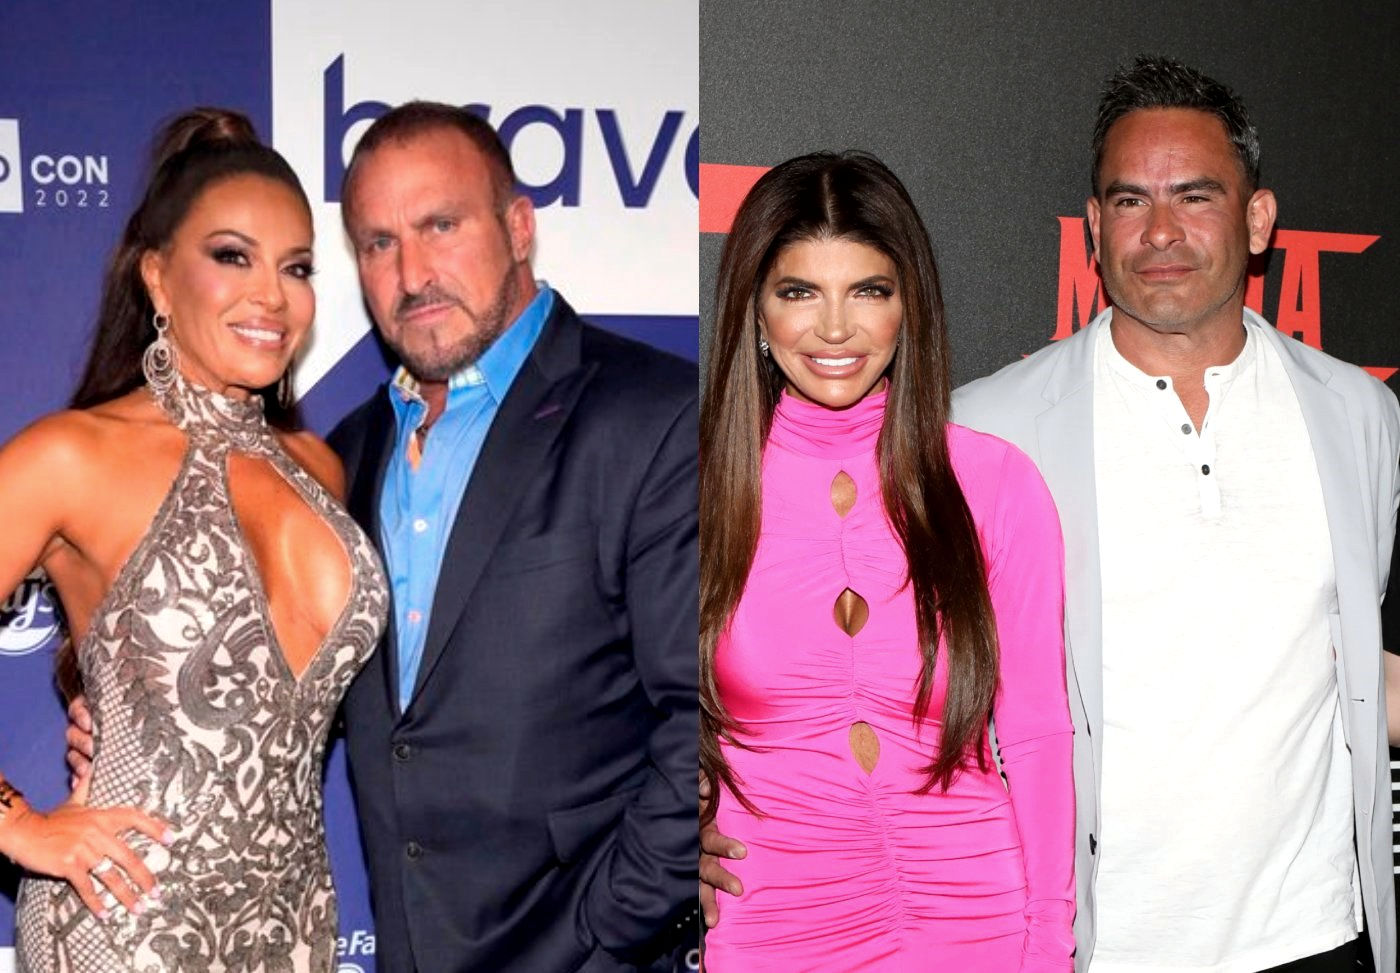 RHONJ's Frank Catania Reacts to Rumors of Bad Business Experience With Luis, Are Teresa and Dolores Catania Feuding Over It?